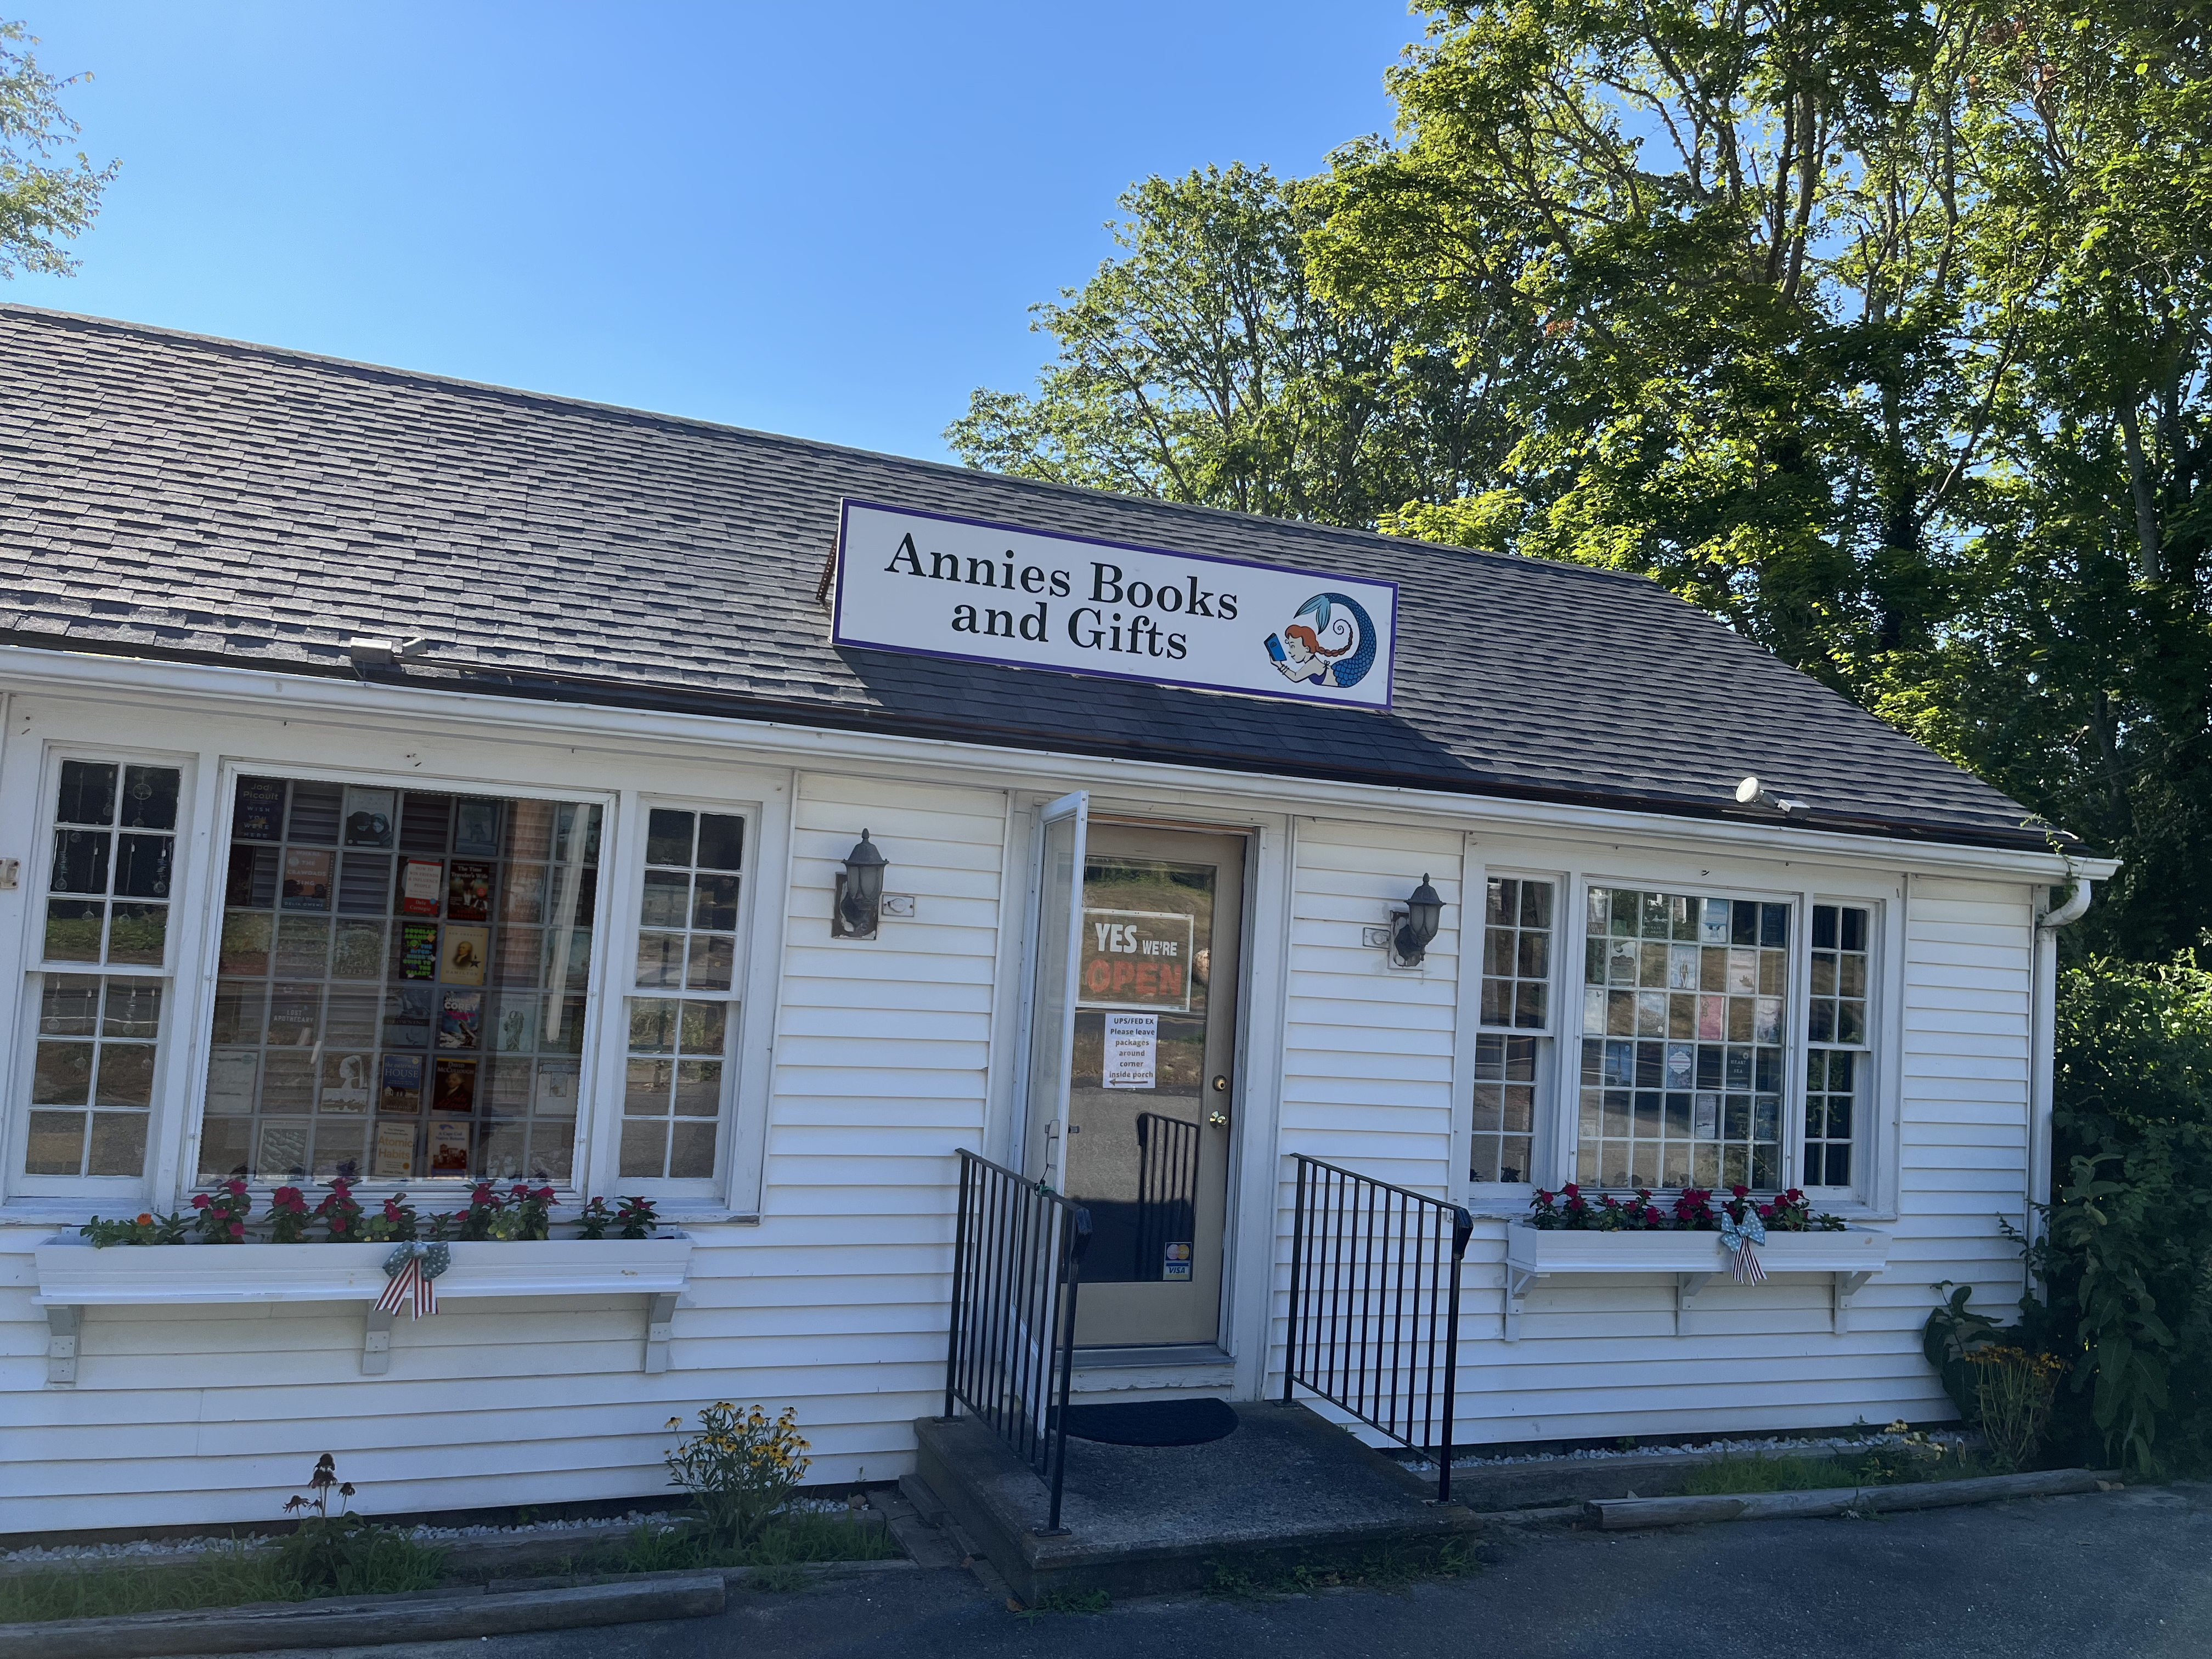 exterior of annies book store